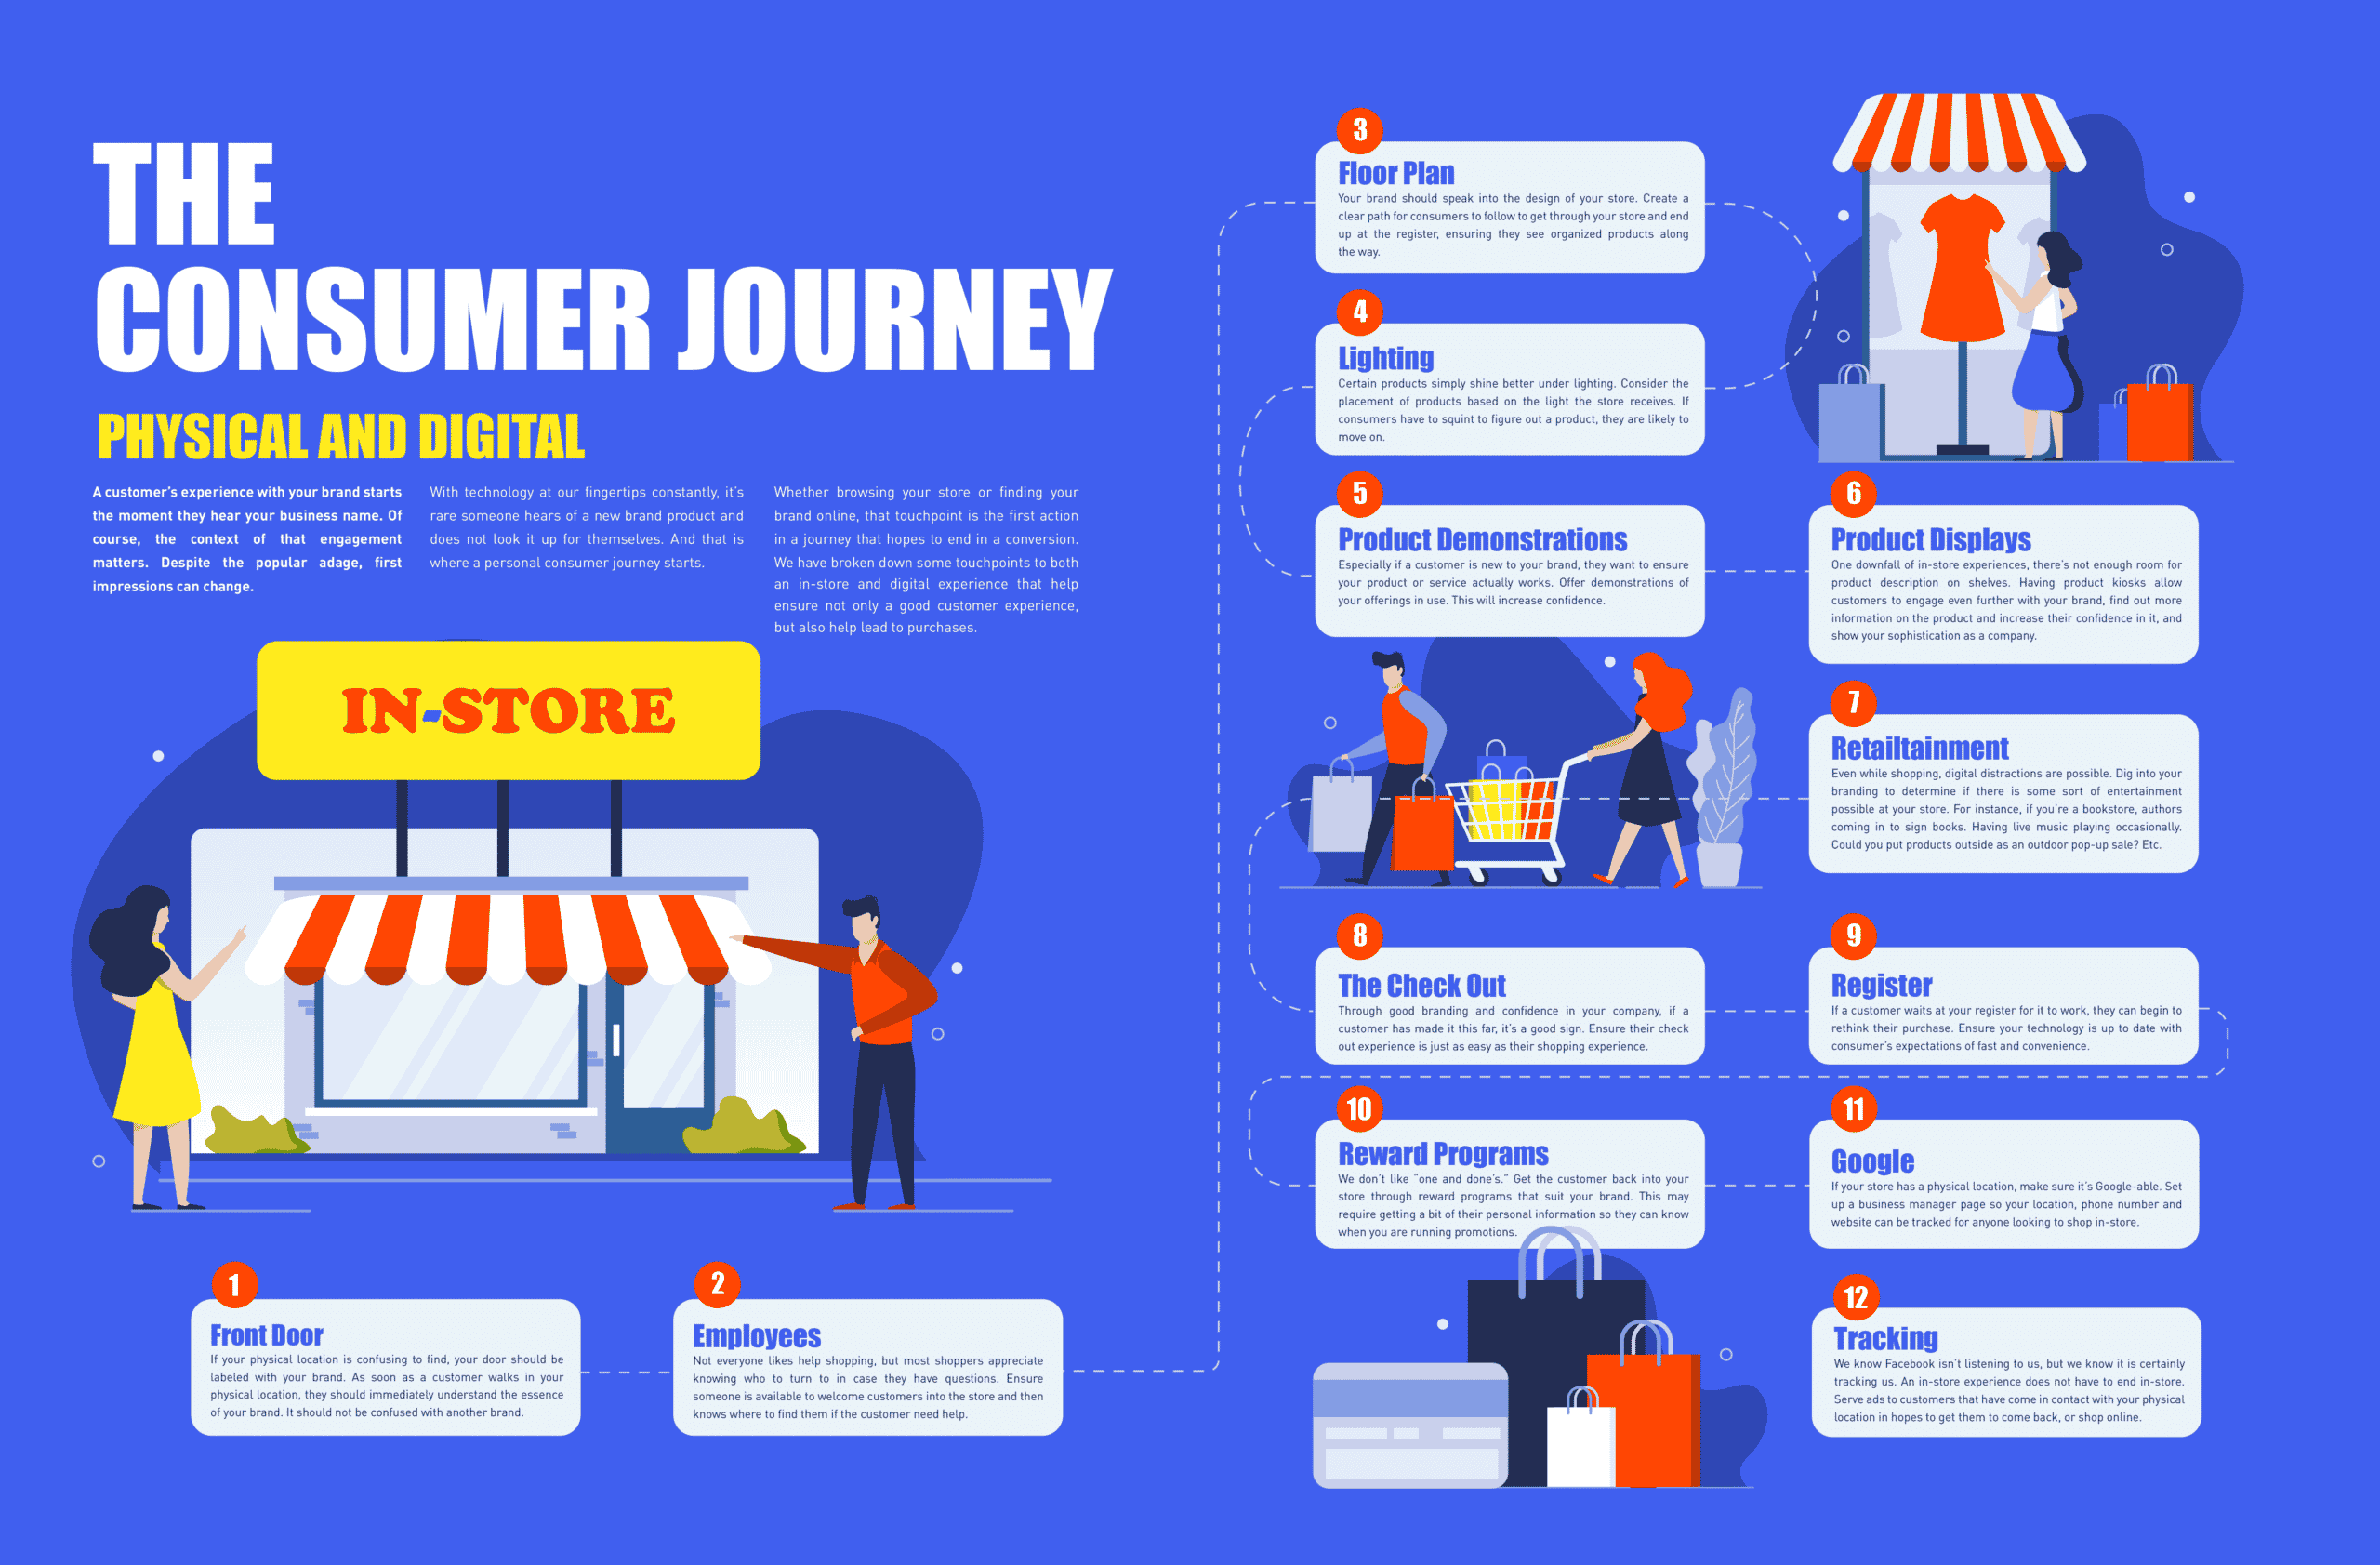 consumer-journey-in-store-image